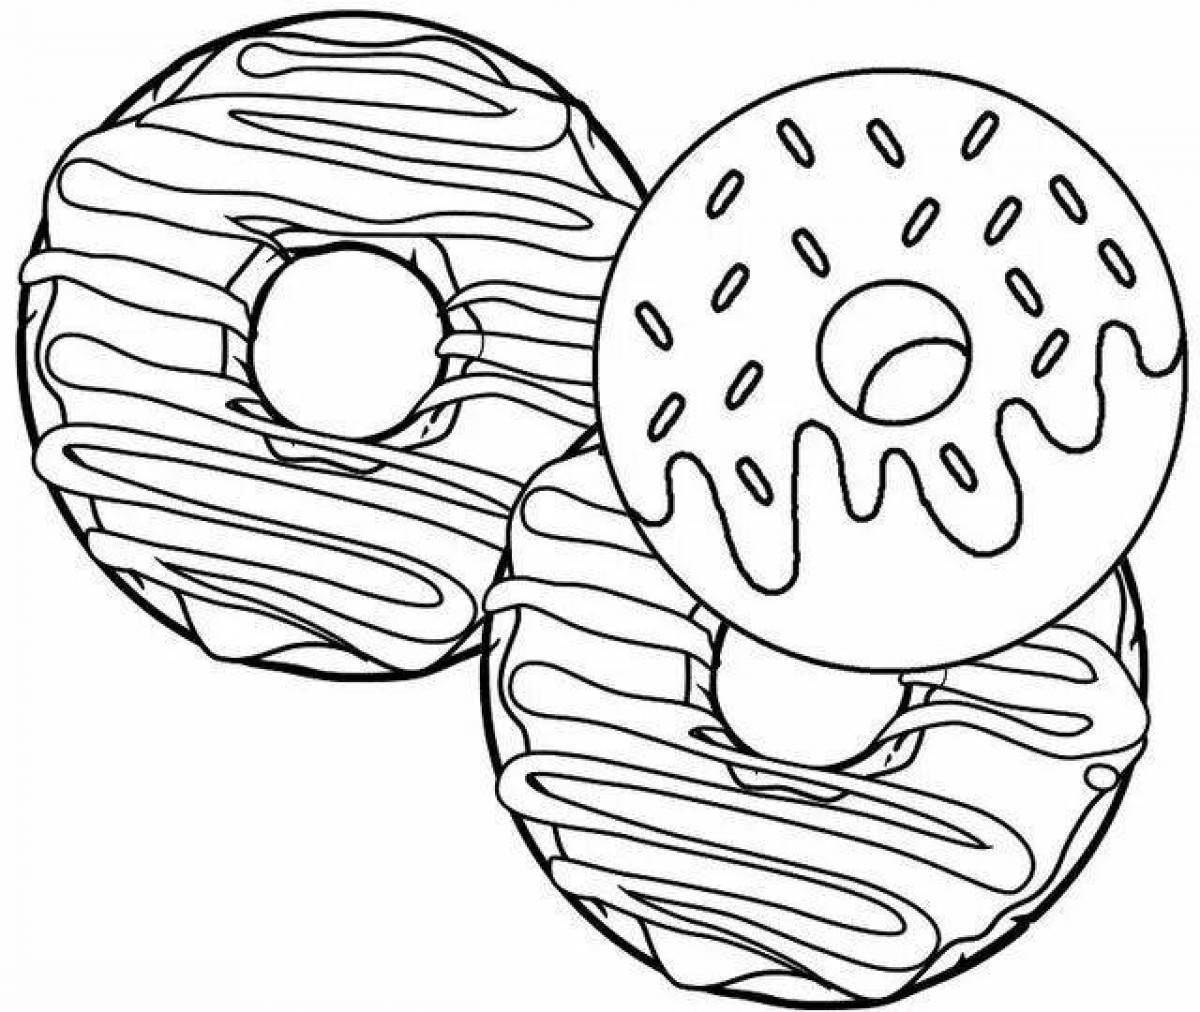 Delicious donut coloring book for kids